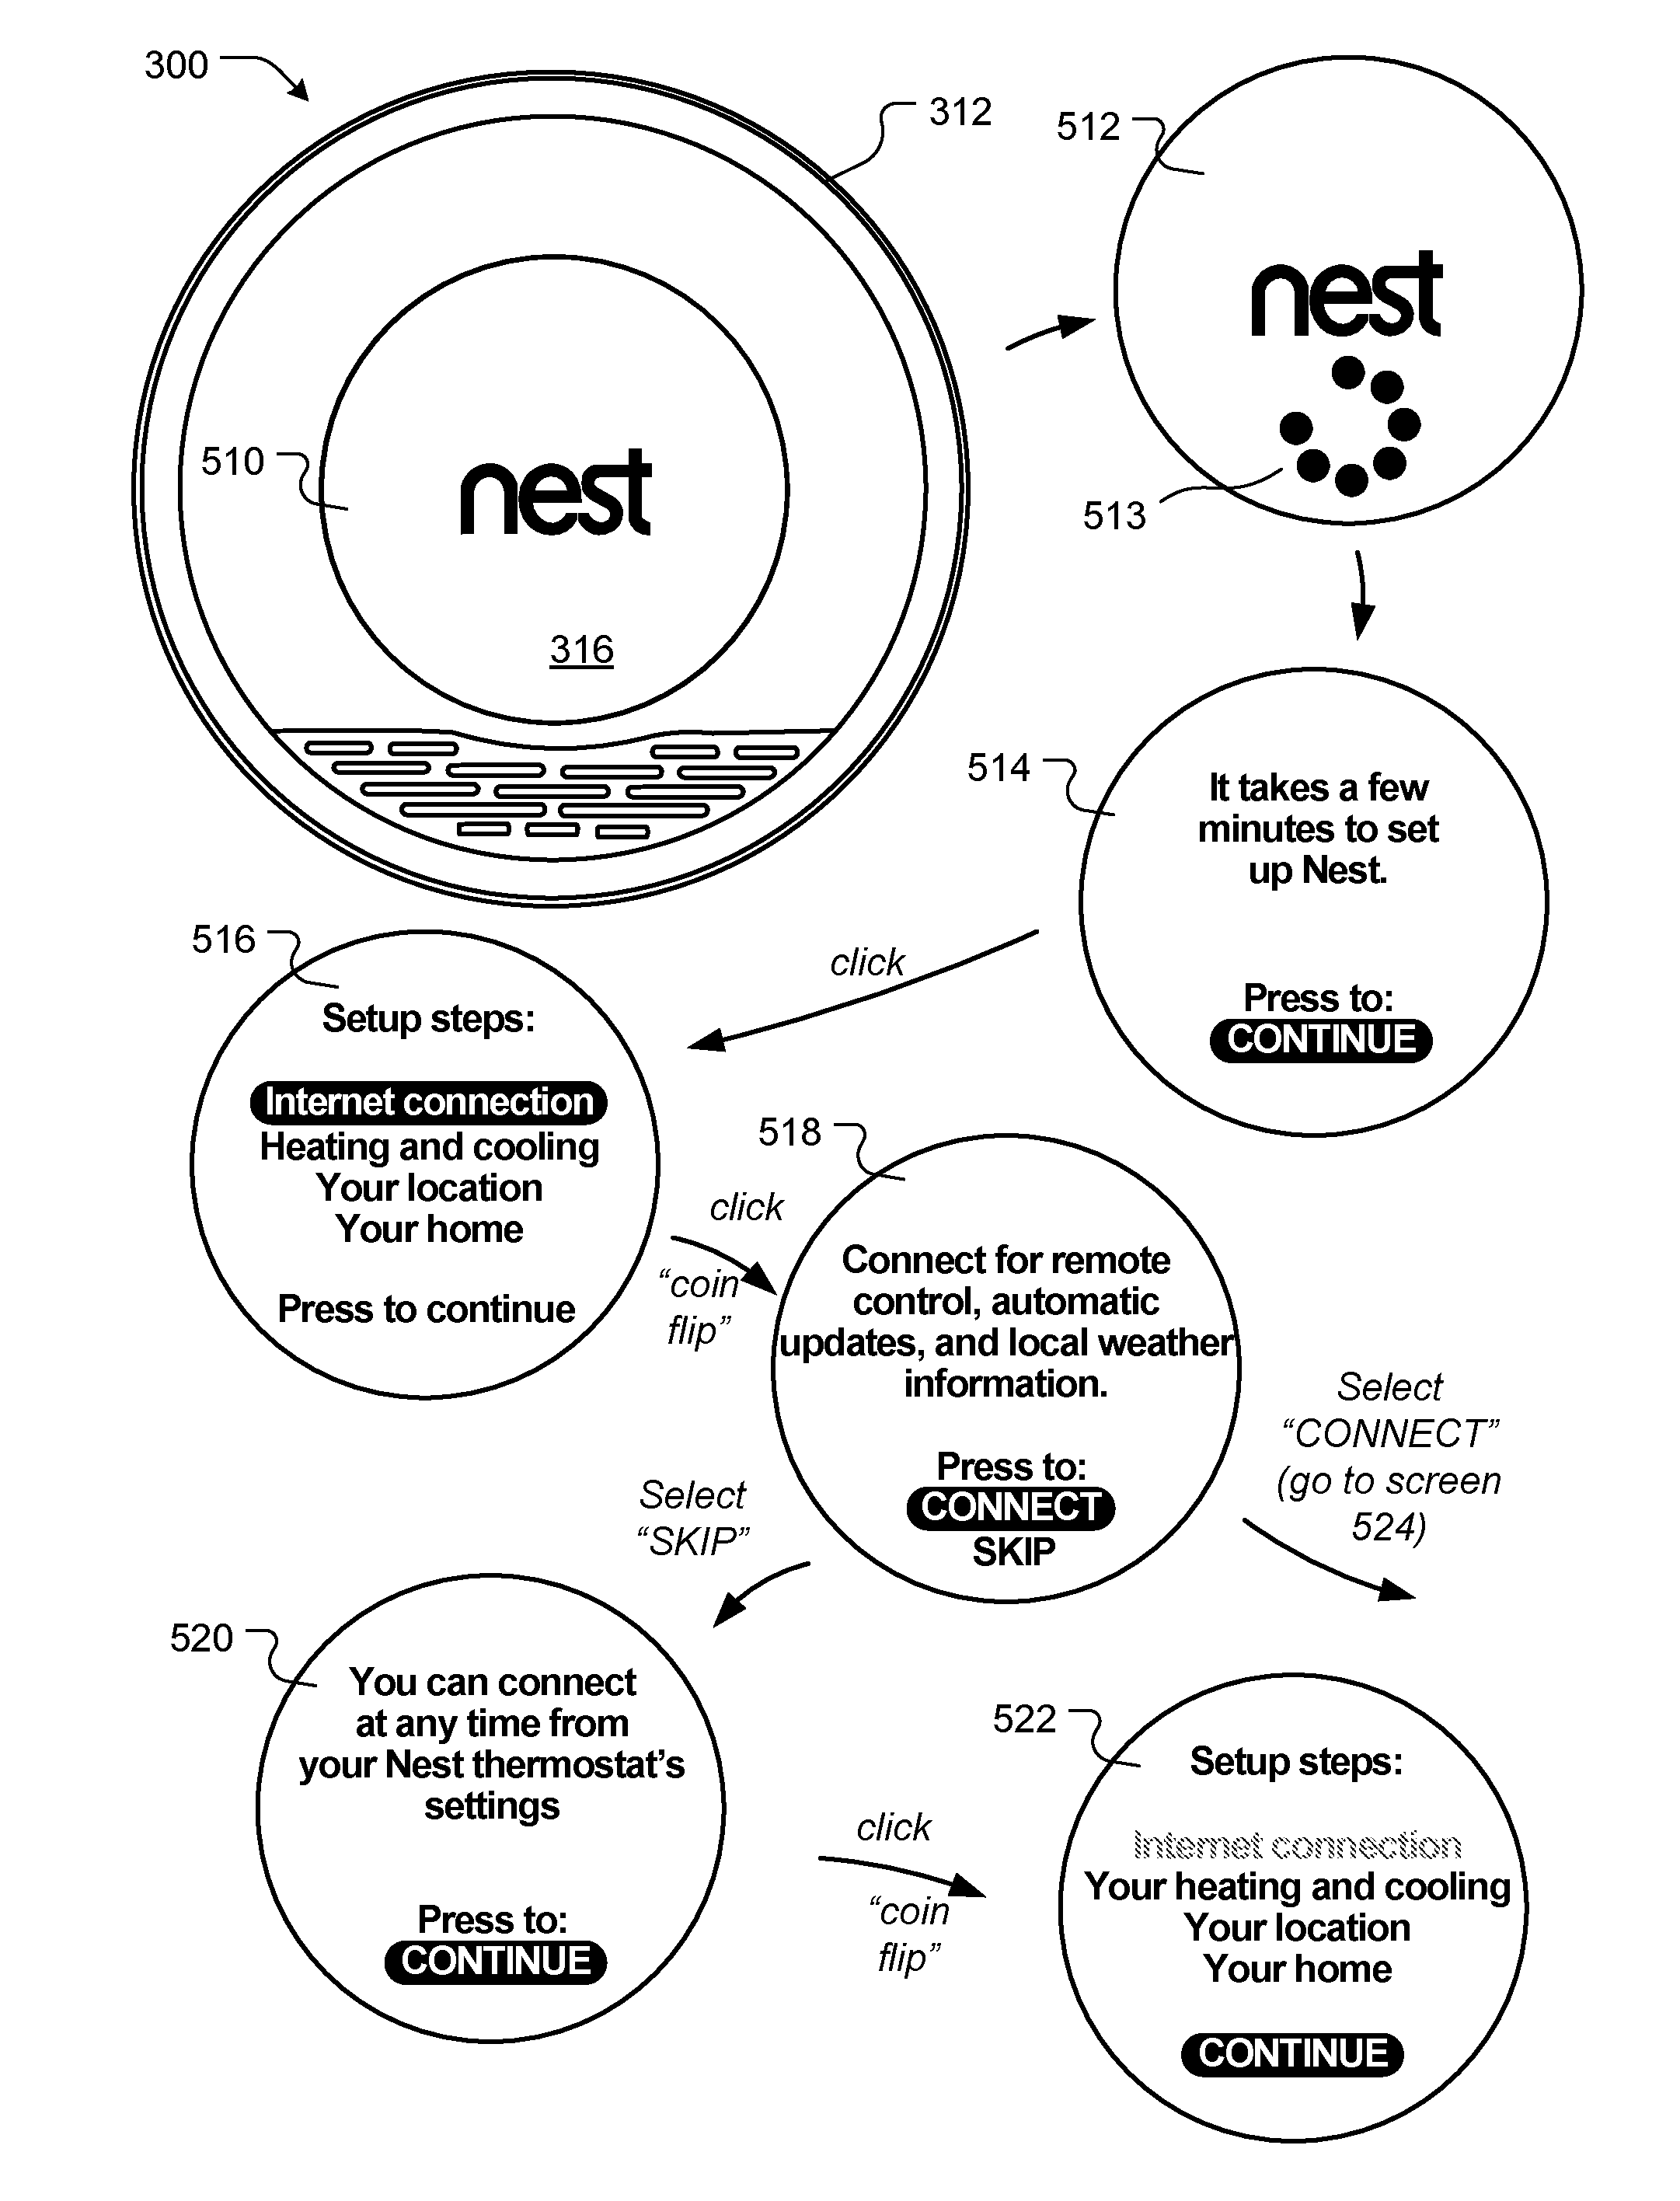 Systems and Methods for Energy-Efficient Control of an Energy-Consuming System